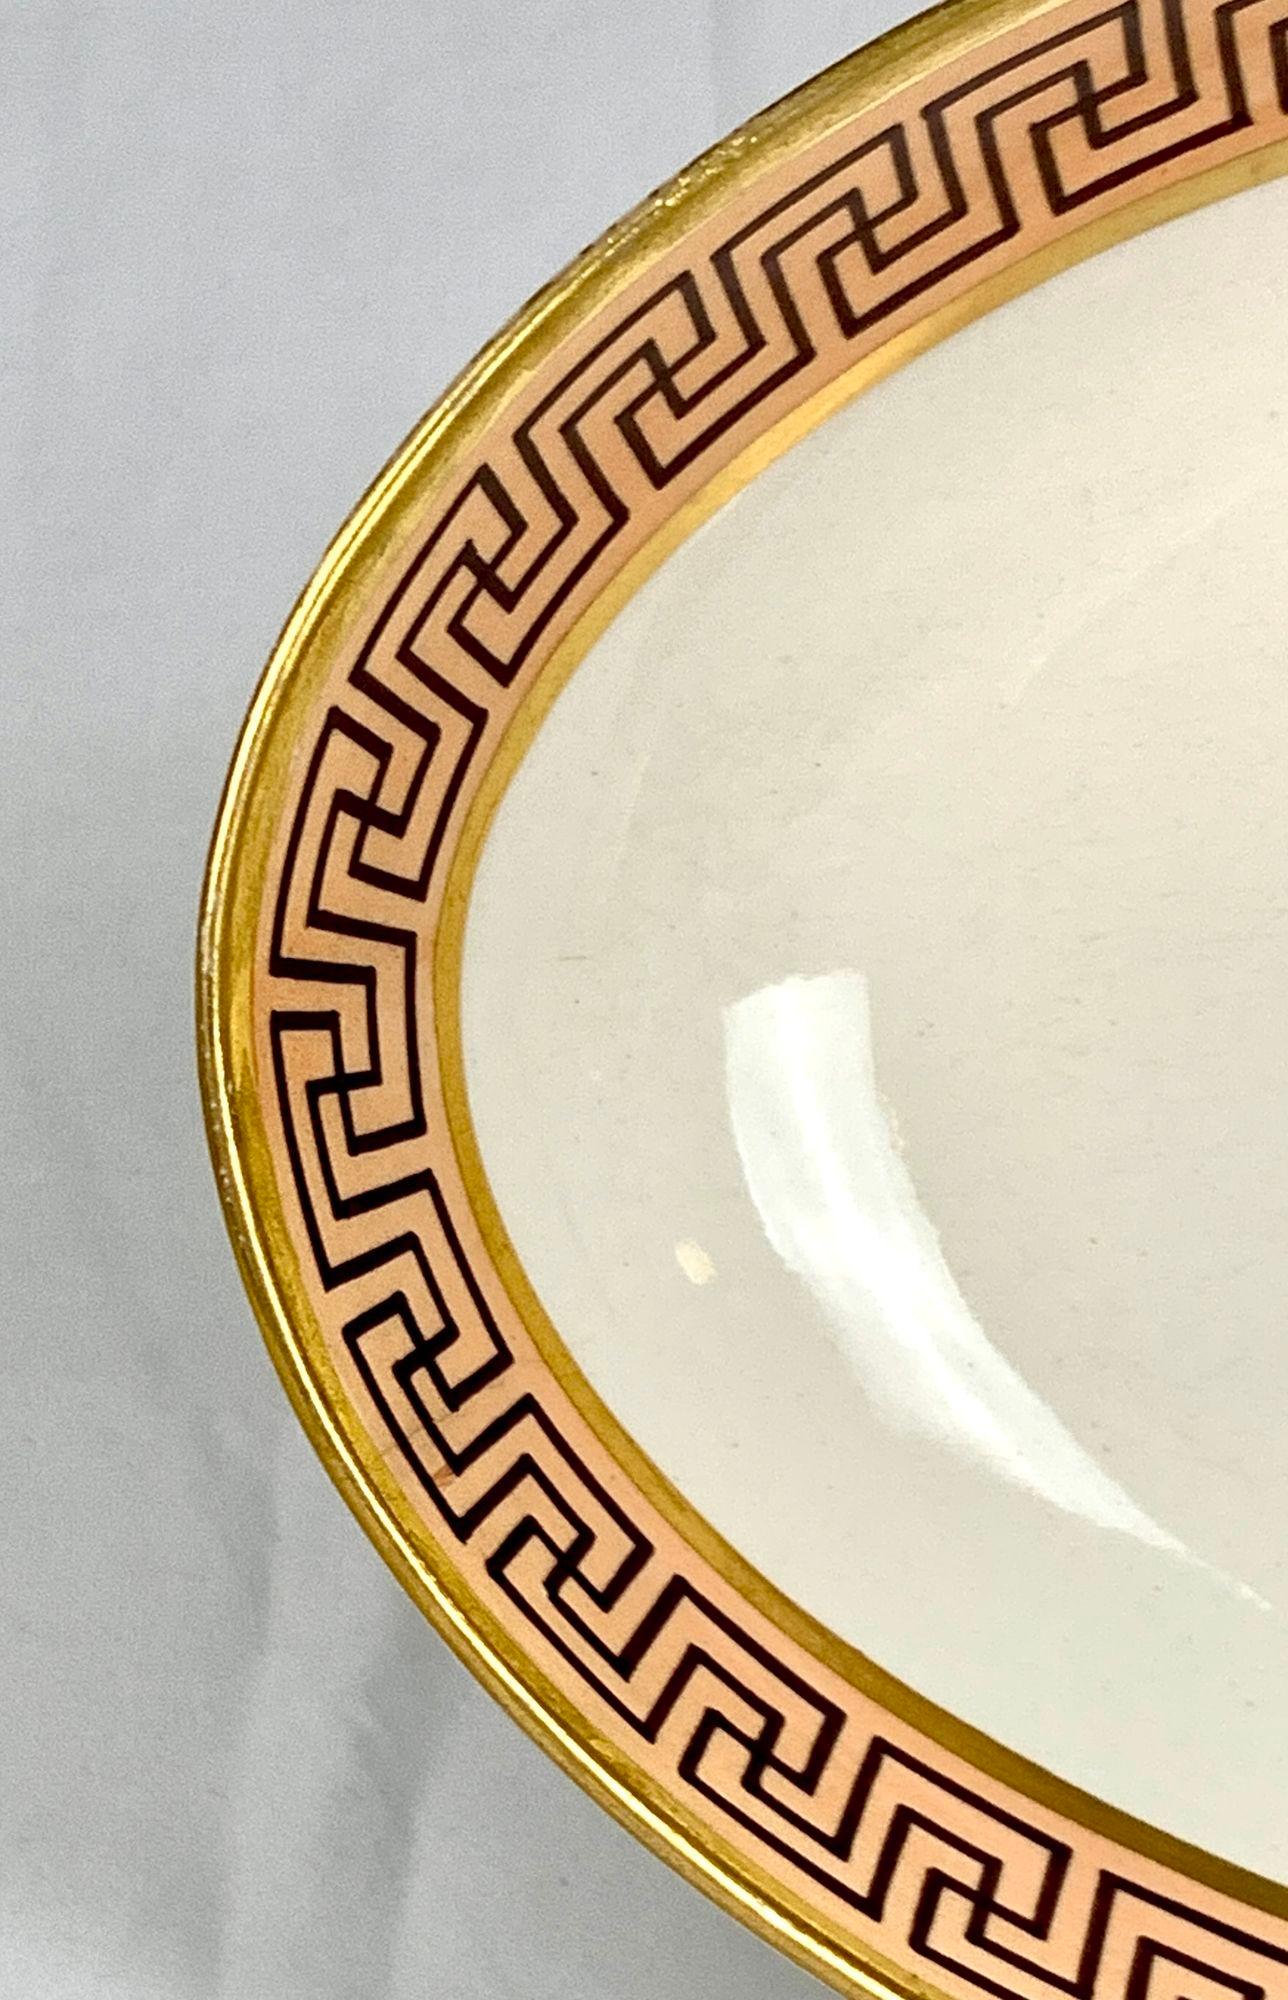 This is the perfect dish to place on a low table with candies or by the front door to welcome you home and hold your keys and other small items.
The strong purple Greek key decoration on the soft peach ground is exquisite!
The lavish gilding framing